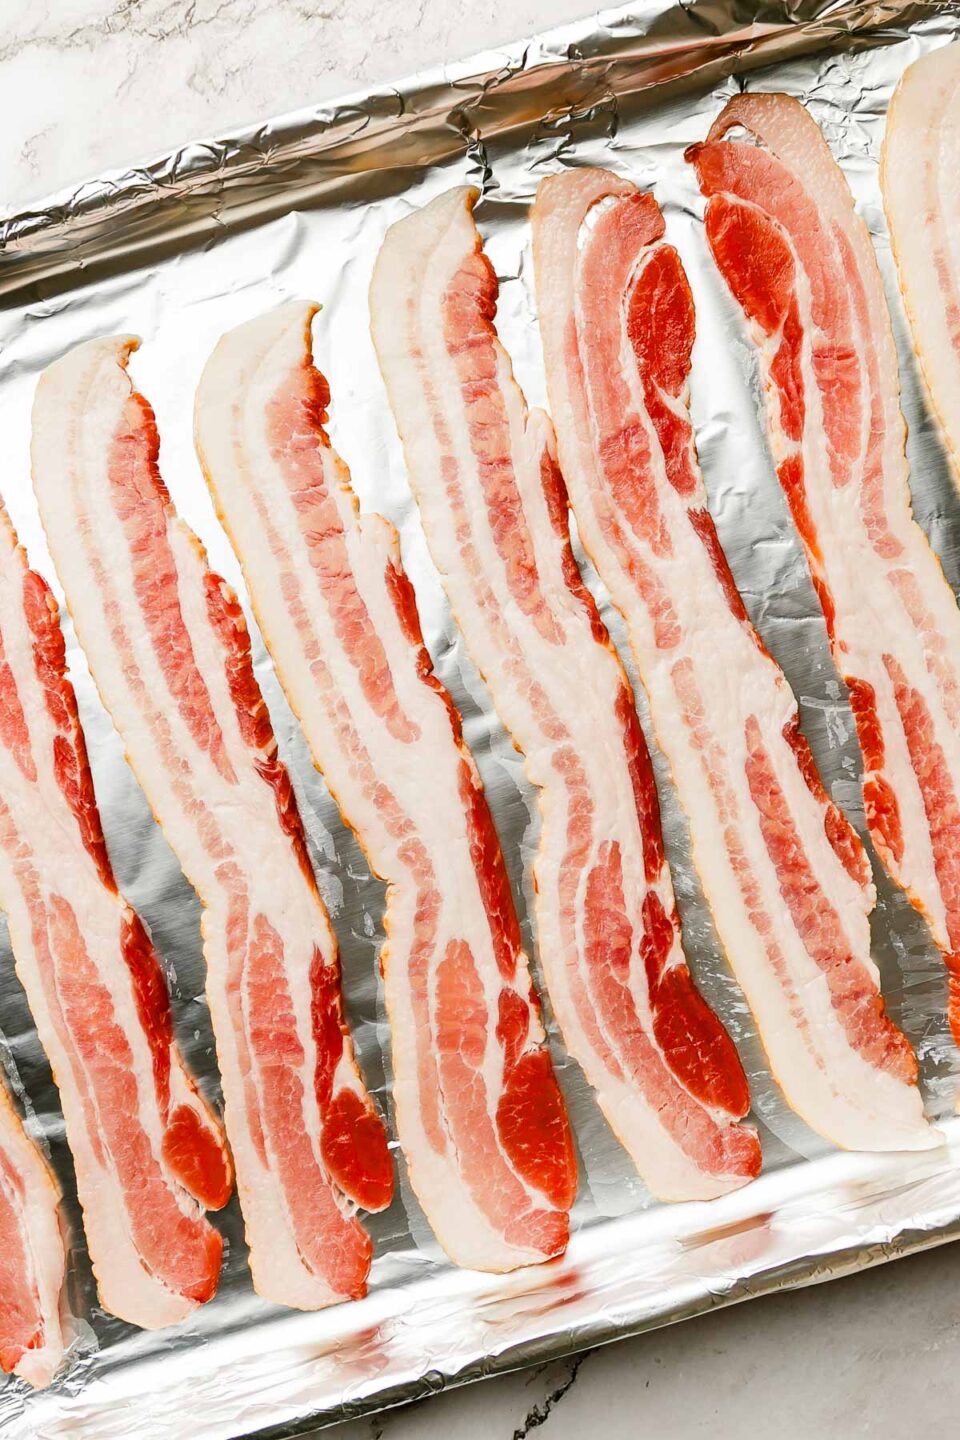 An overhead shot of raw bacon slices on a foil-lined sheet pan, sitting atop a white marbled surface.